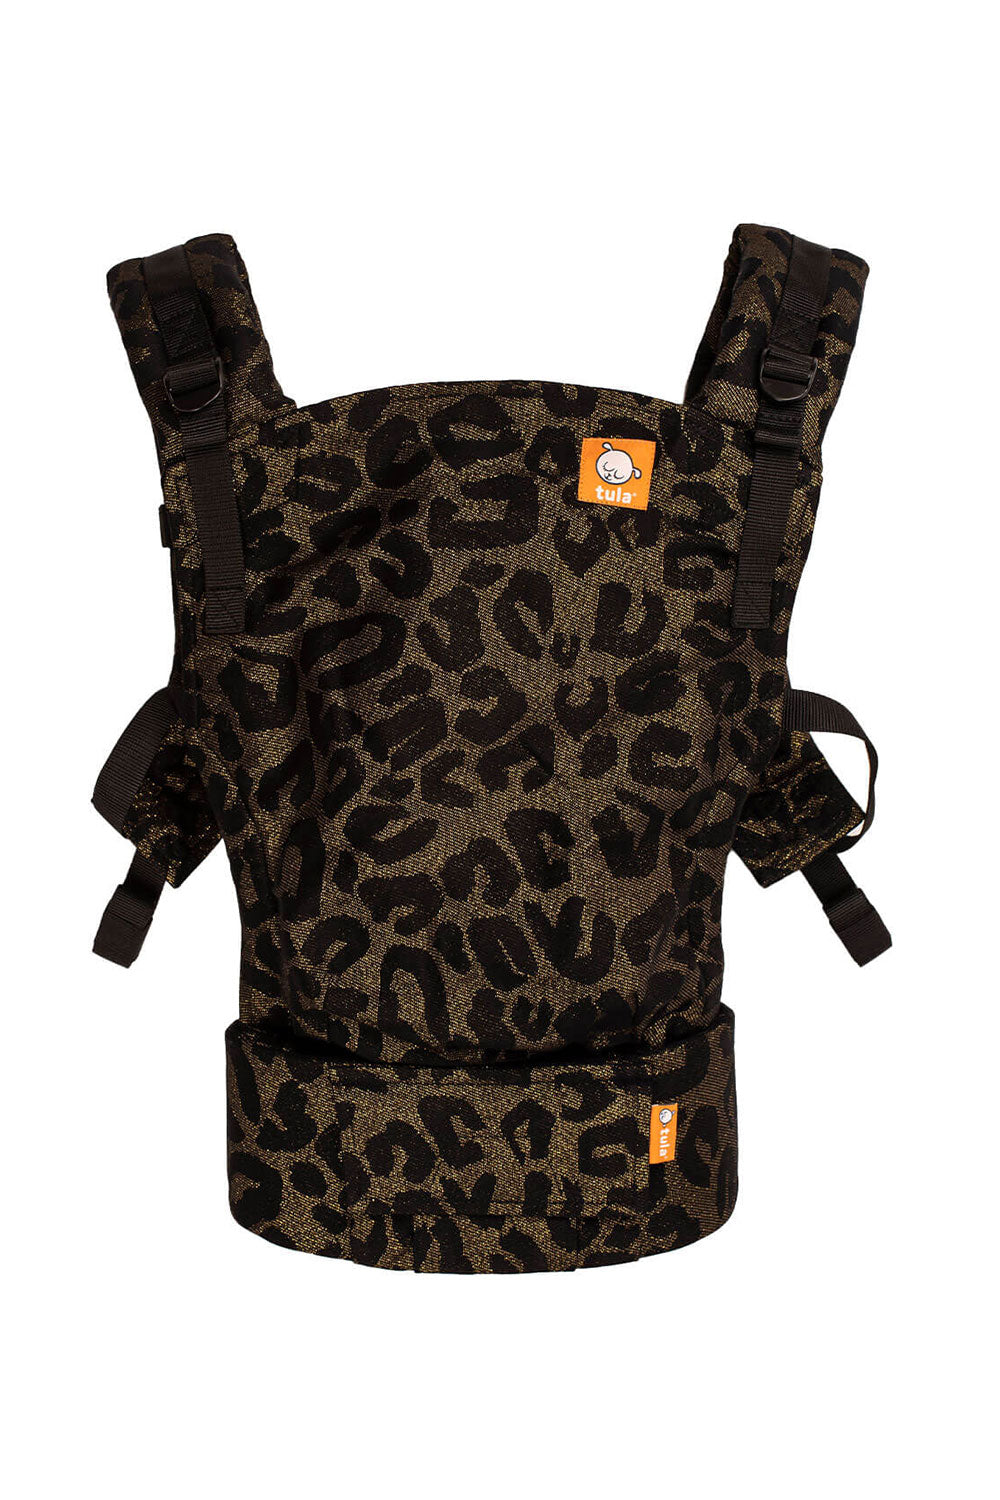 Welcome to the Jungle - Golden Rays - Signature Woven Free-to-Grow Baby Carrier